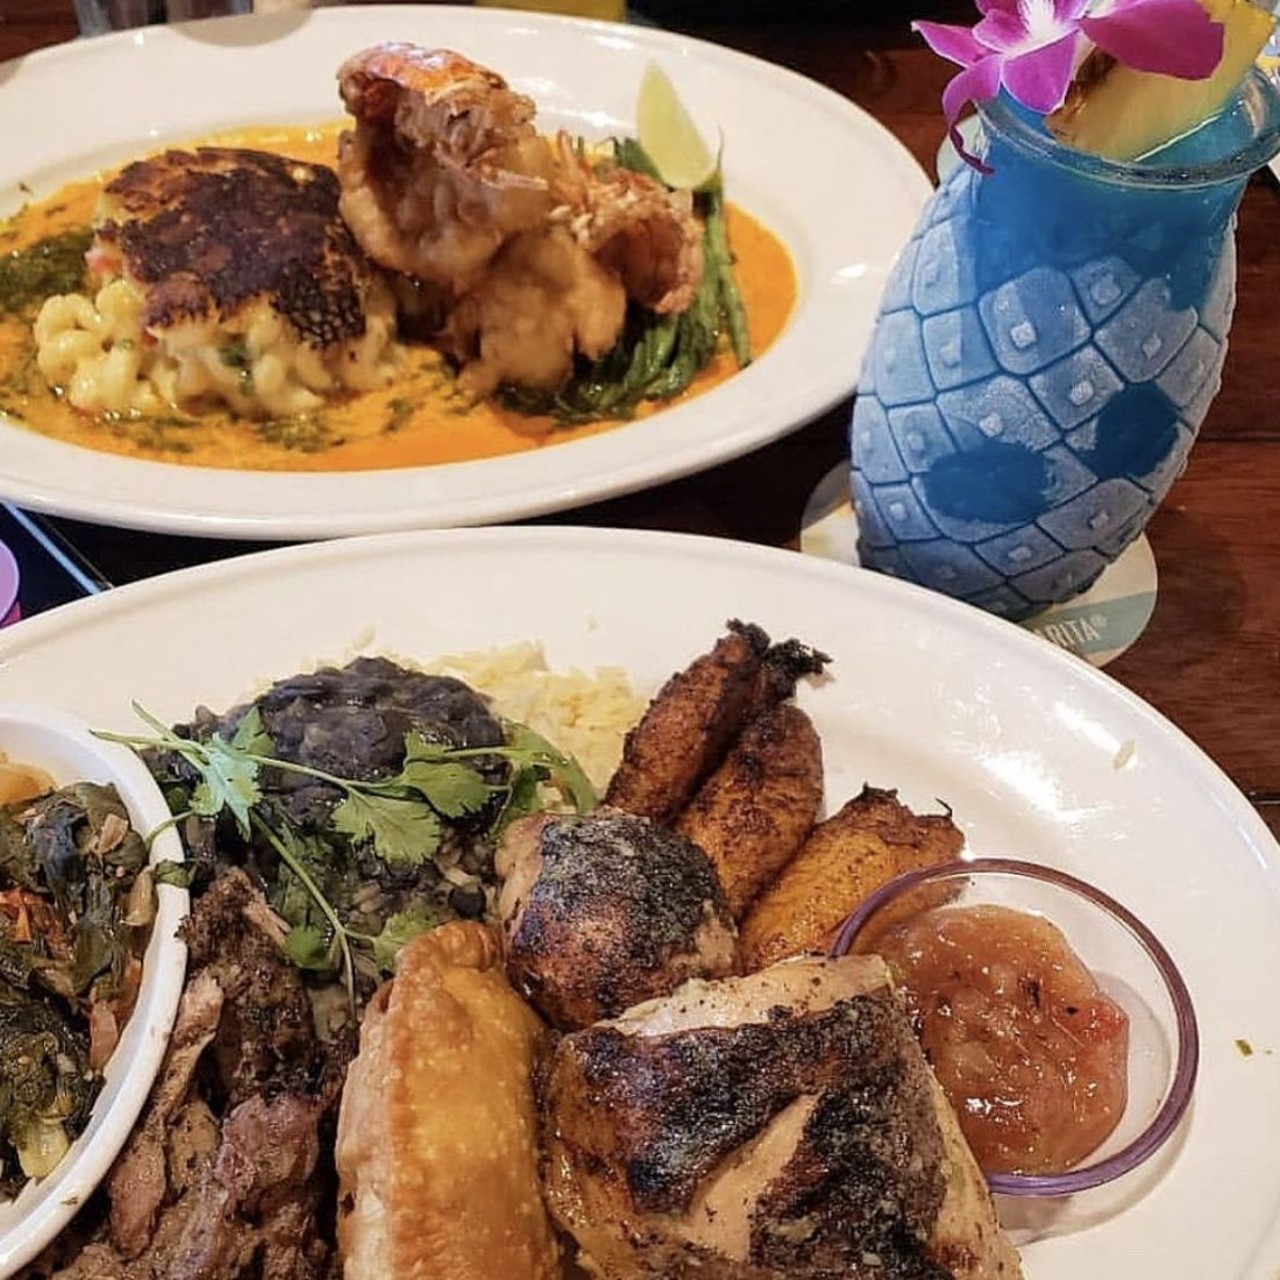 Bahama Breeze
19600 Haggerty Rd, Livonia, MI 48152
This Caribbean themed chain will be open with their regular menu as well as a Thanksgiving dinner that&#146;s $20 for adult and $12 for children. 
Photo via Bahama Breeze Instagram @bahamabreezeislandgrille